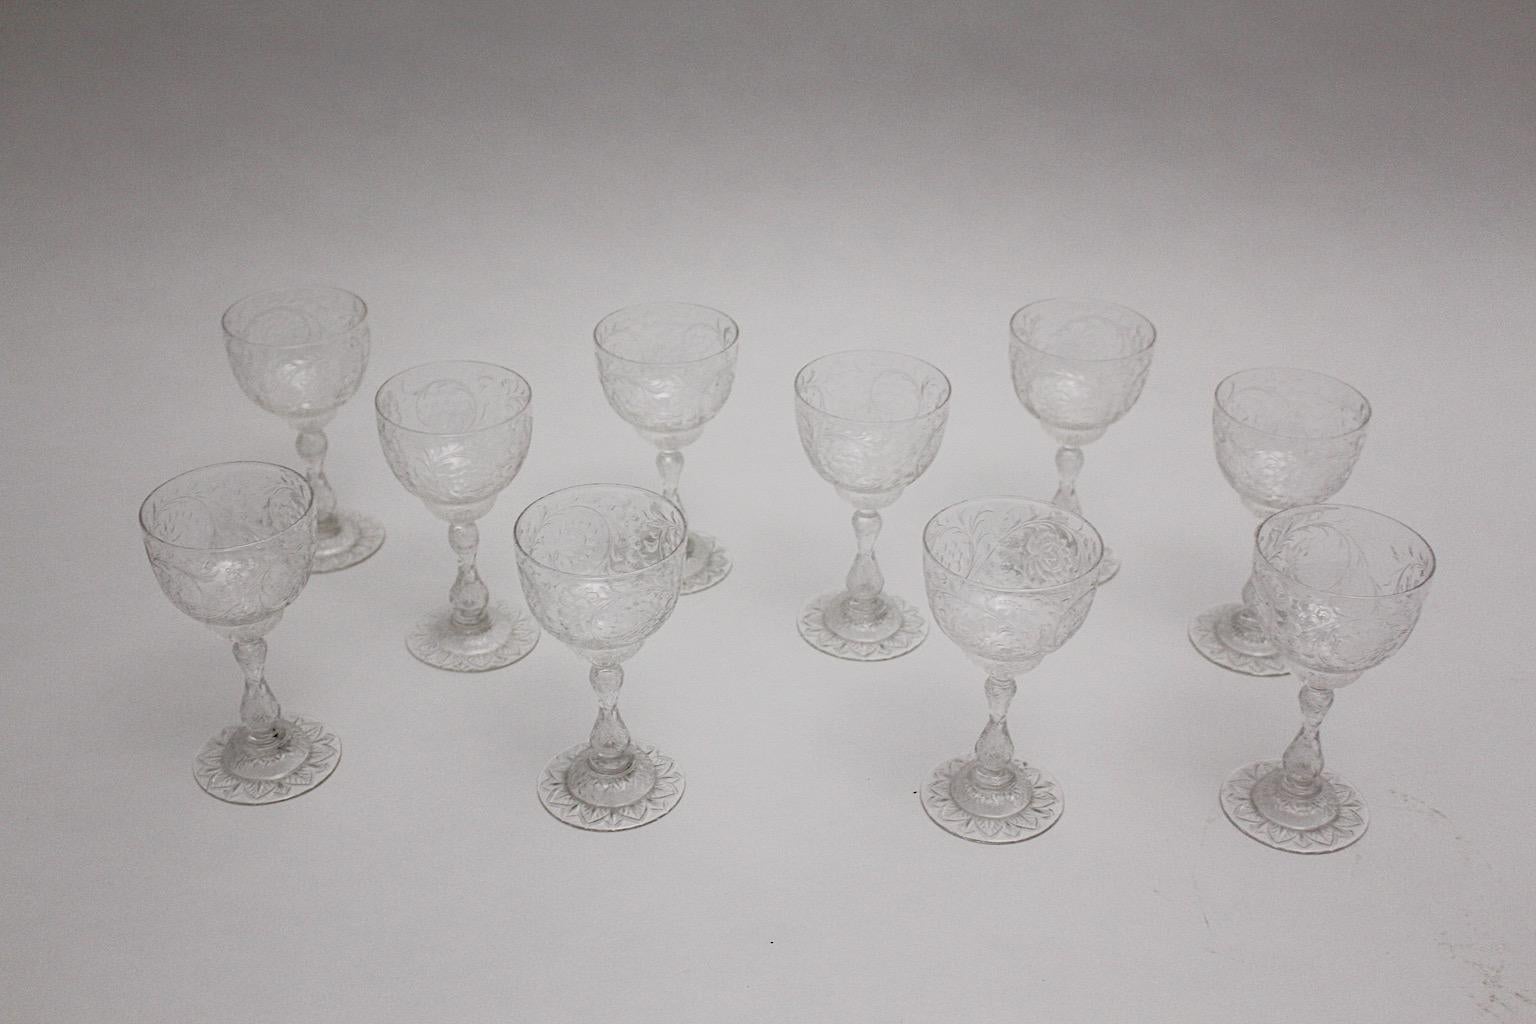 Thomas Webb and Sons attributed circa 1903, United Kingdom 
Jugendstil period ten ( 10 ) wine glasses cut and engrave glass ware set with delicate flower motifs.
Thomas Webb ( 1804 - 1869 ) English glassmaker and the founder of Thomas Webb and Sons,